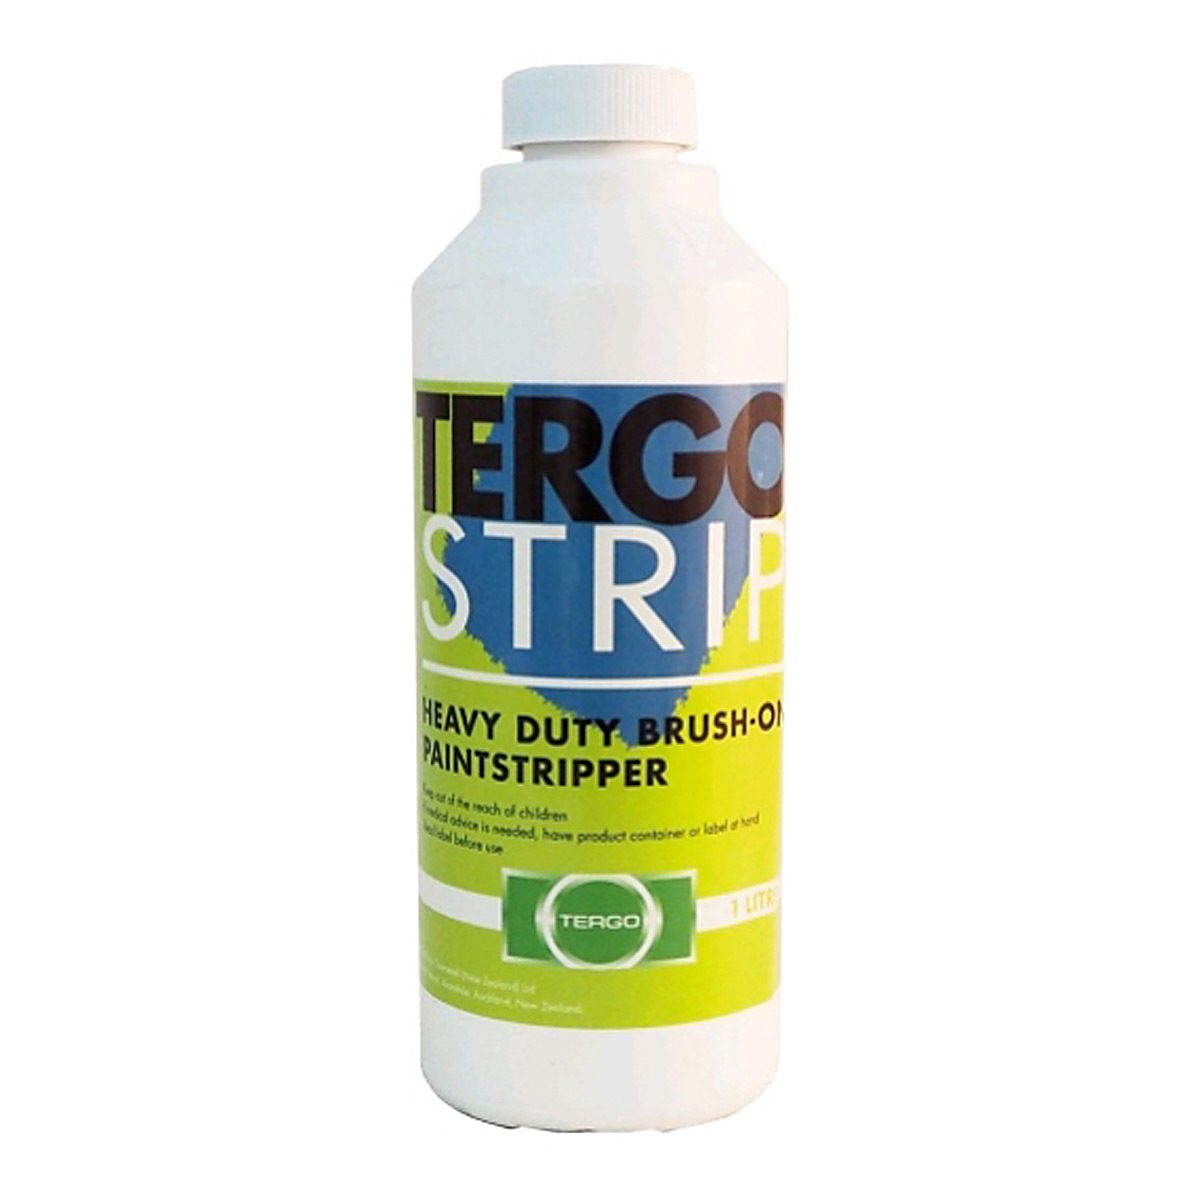 cleaning-products-industrial-specialist-tergostrip-bo-1-litre-aggressive-heavy-duty-paint-remover-effective-to-remove-paints-powder-coatings-baked-coatings-acrylic-enamel-melamines-vjs-distributors-10191